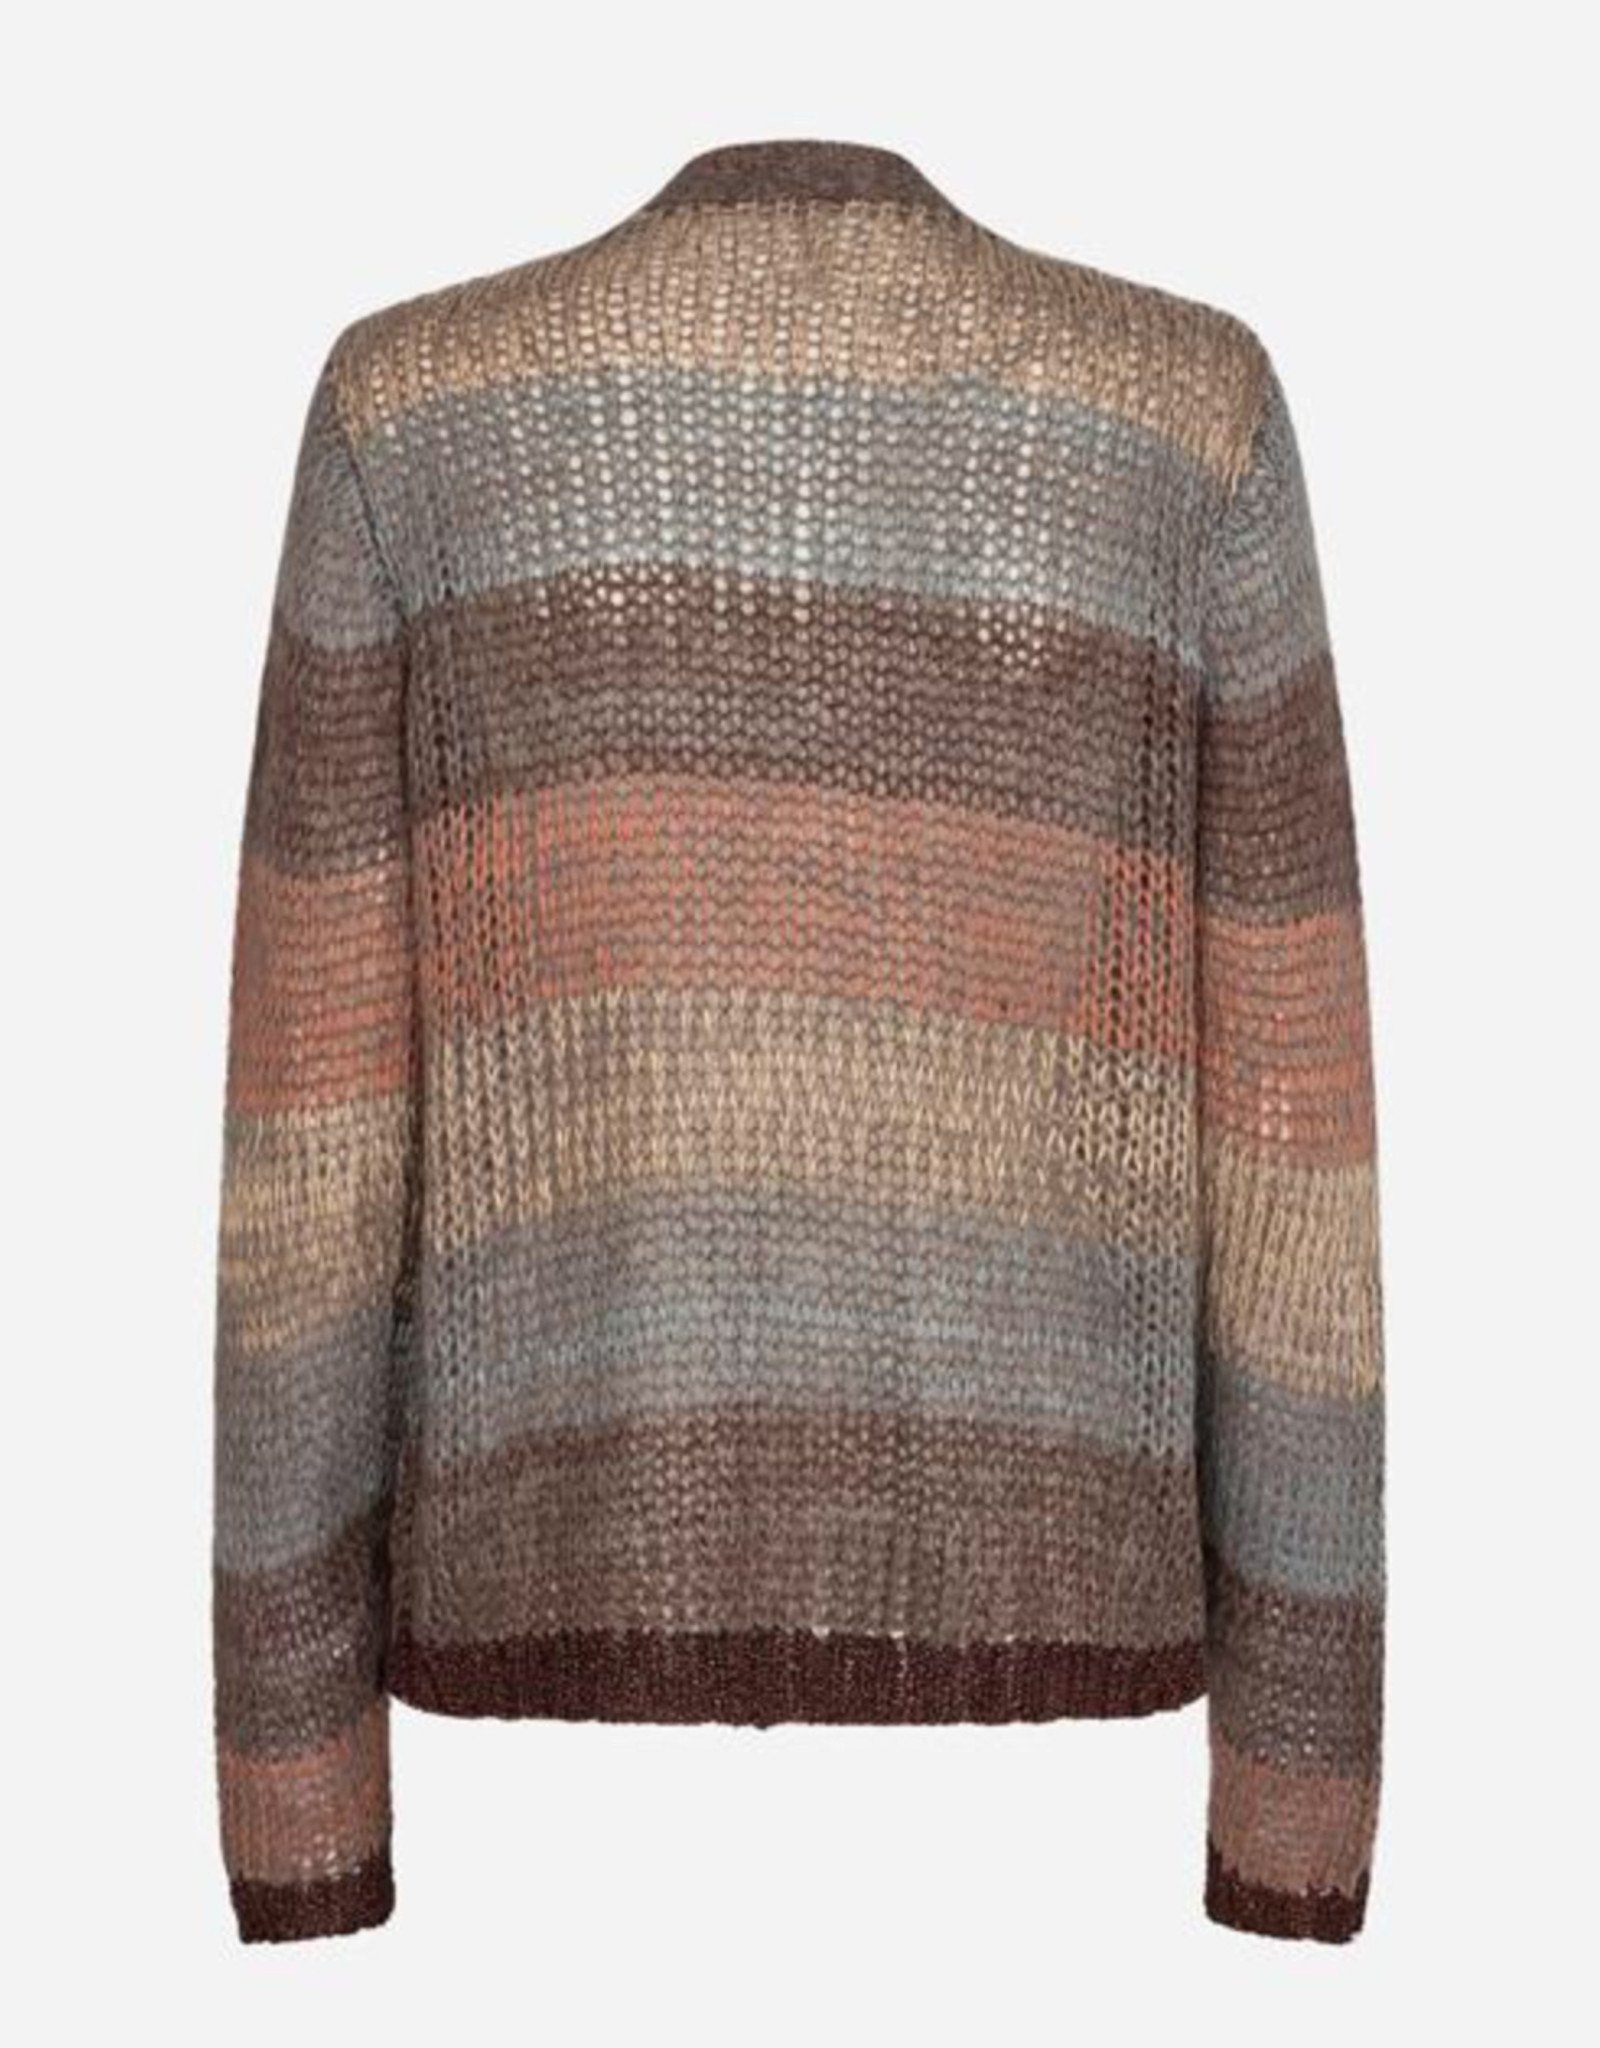 Soya Concept Soya Concept Tini 1 Knitted Mohair Blend Stripped Cardigan Sweater